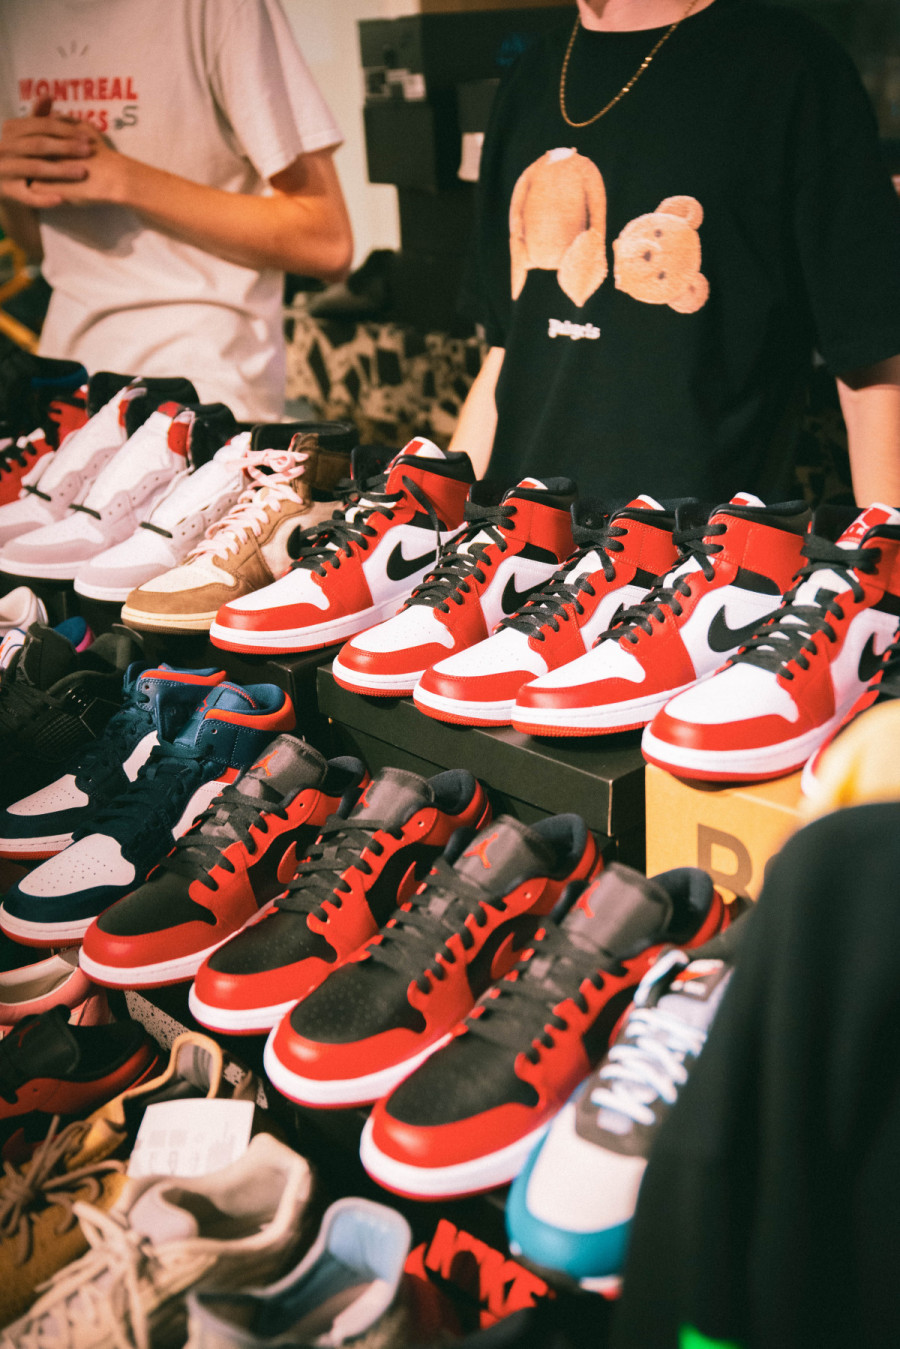 Sneaker culture has fans in Montreal | Fringe Arts – The Link